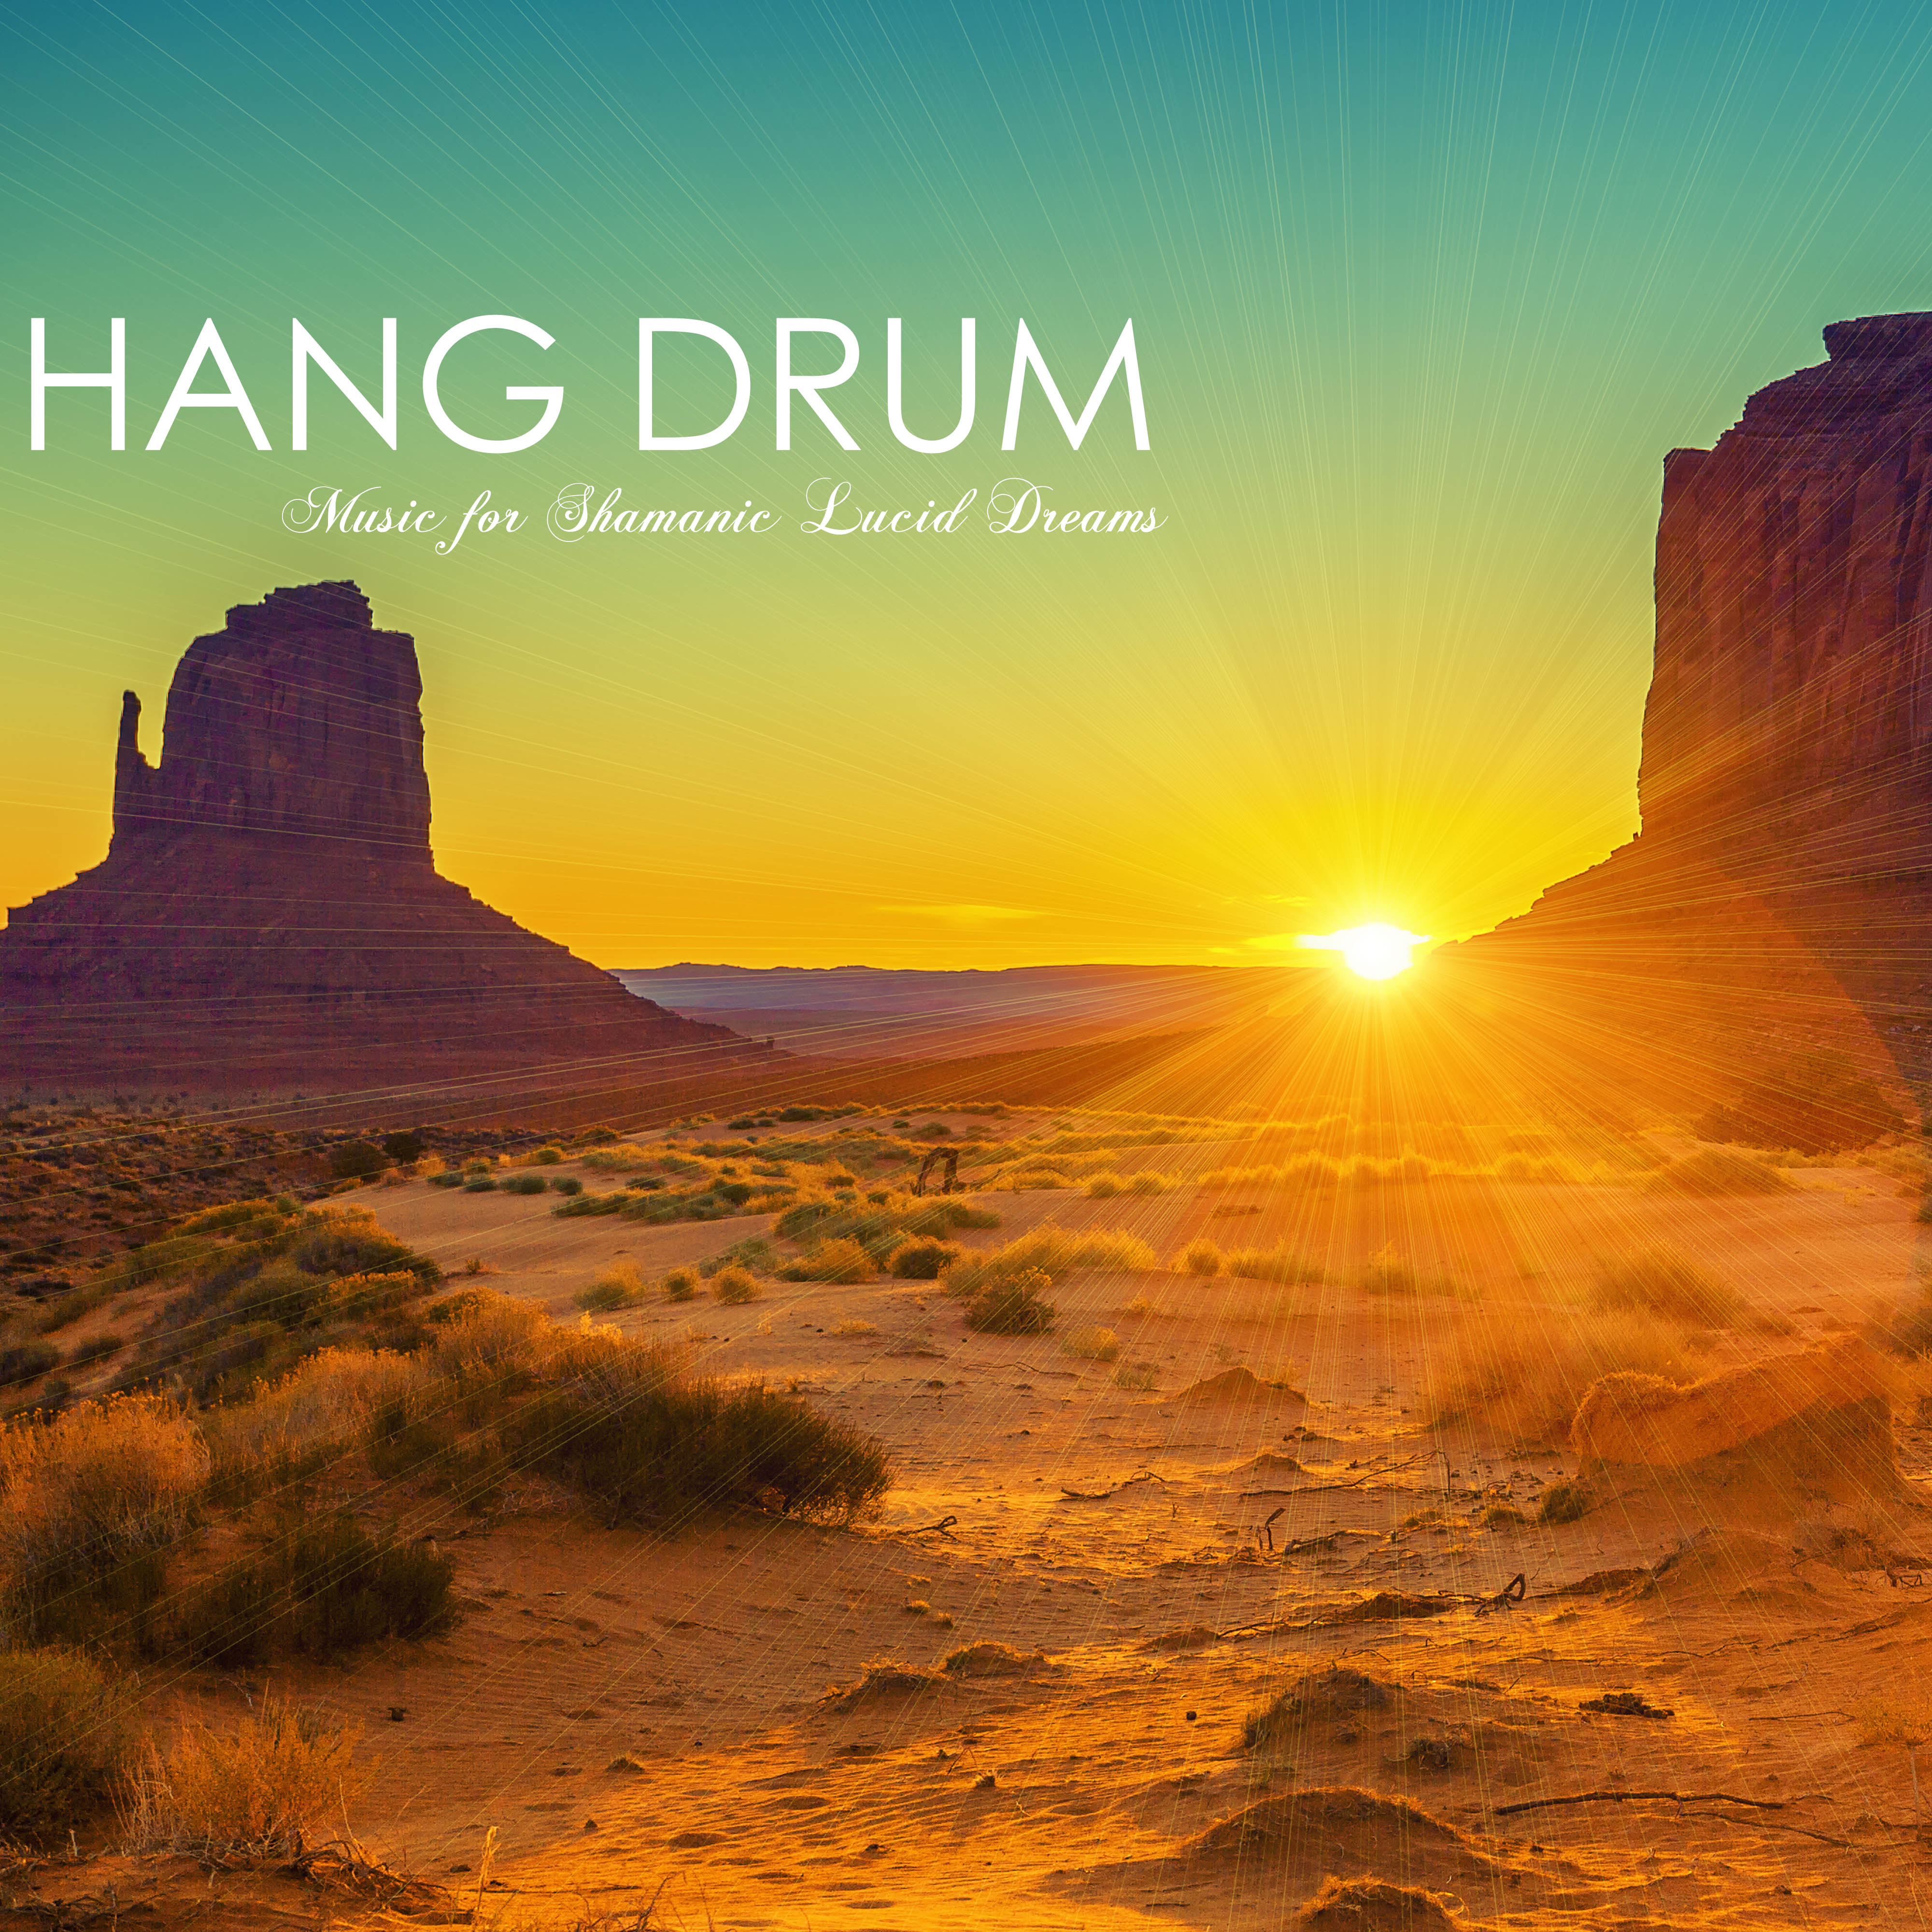 Hang Drum - Nomad Hippie Music for Shamanic Lucid Dreams